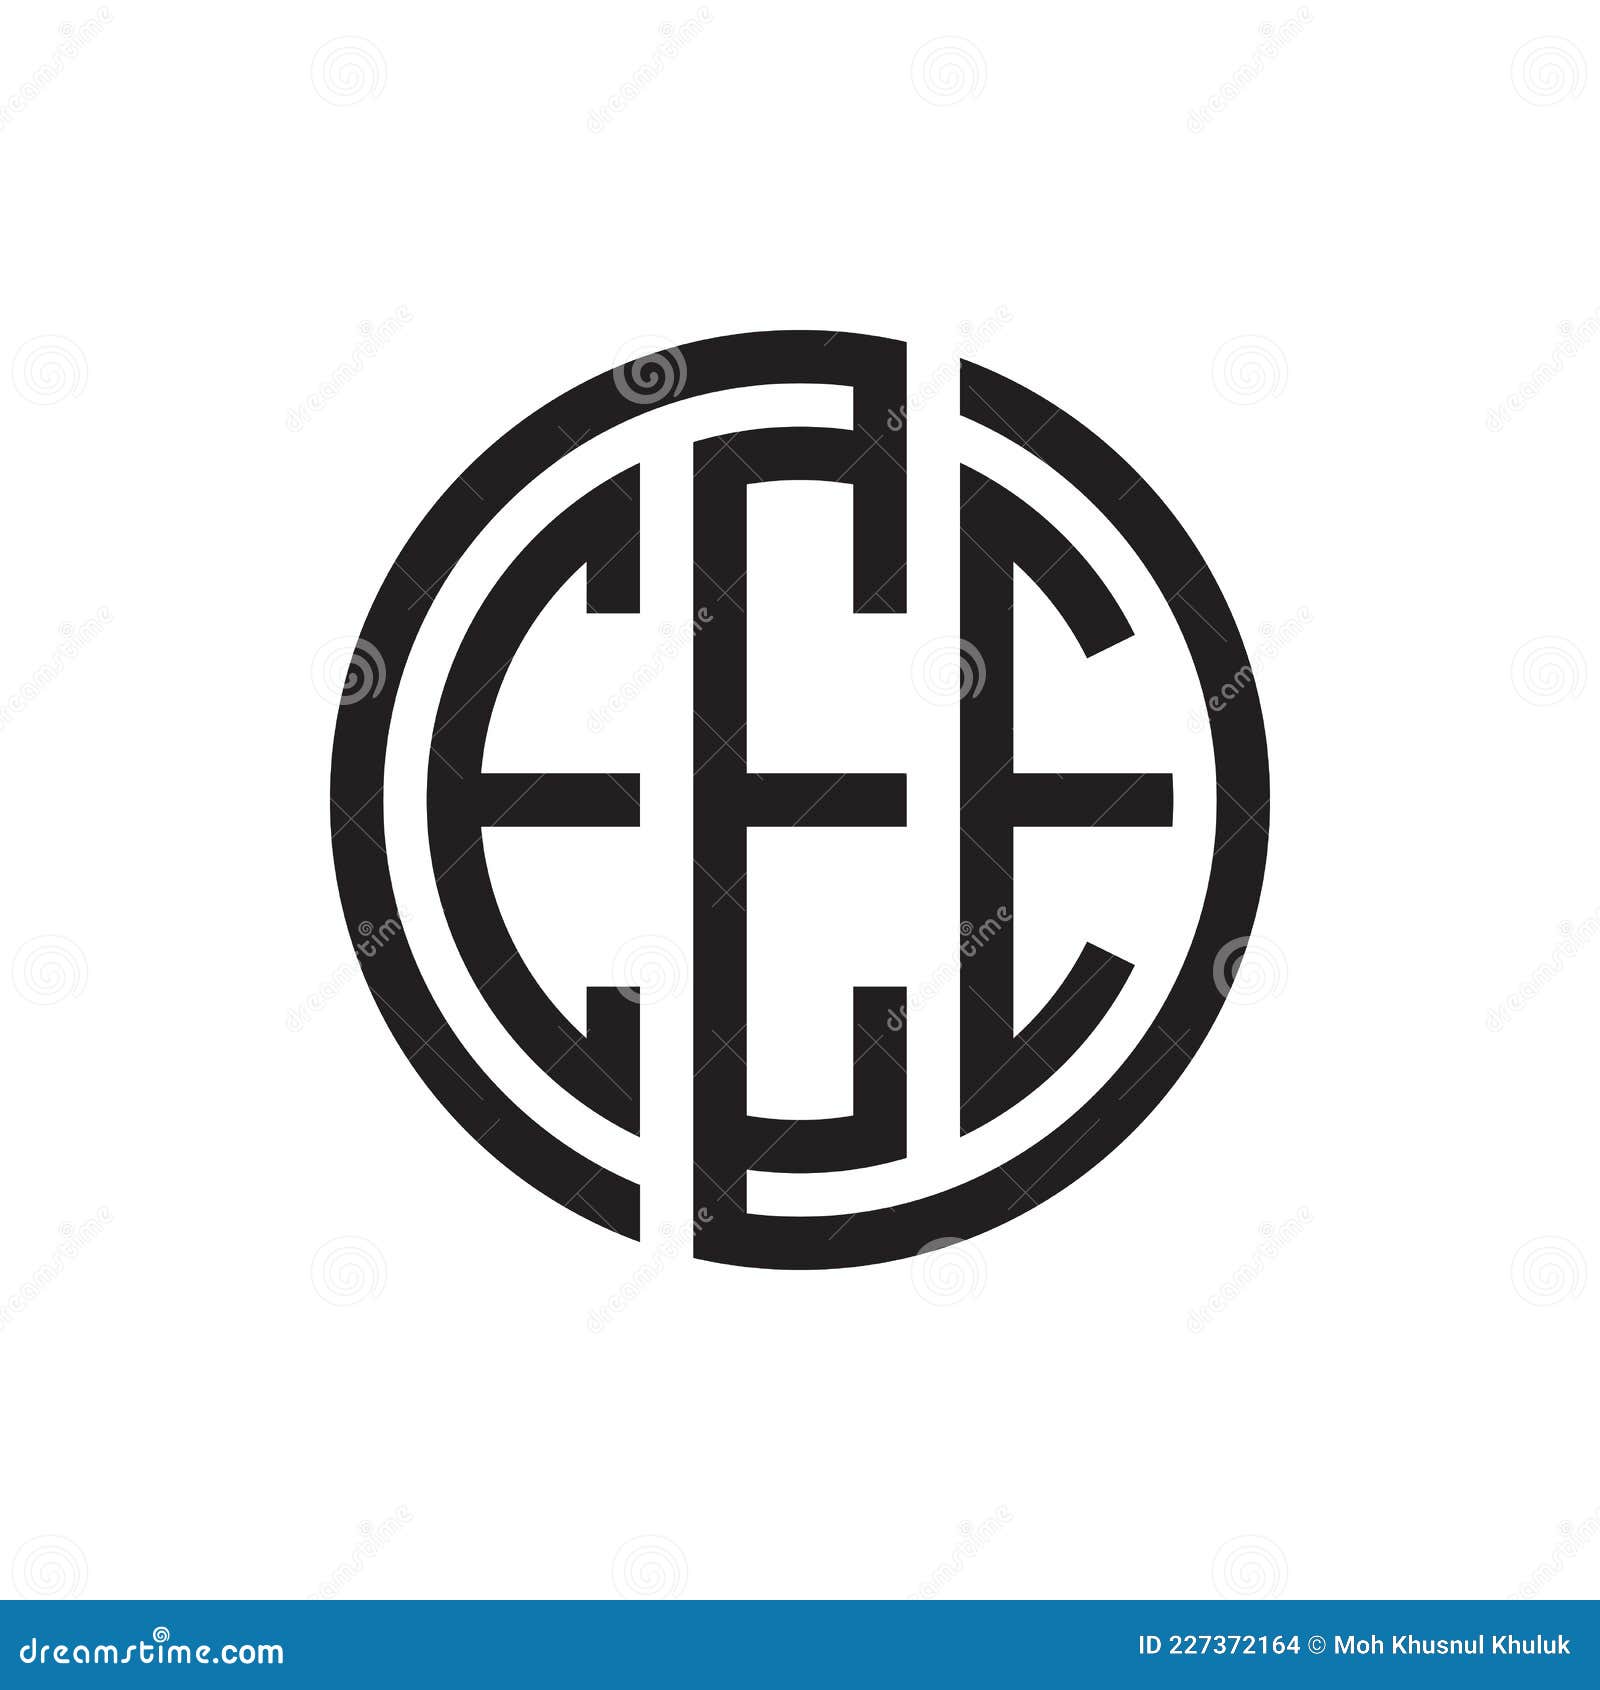 initial three letter logo circle eee black outline stroke